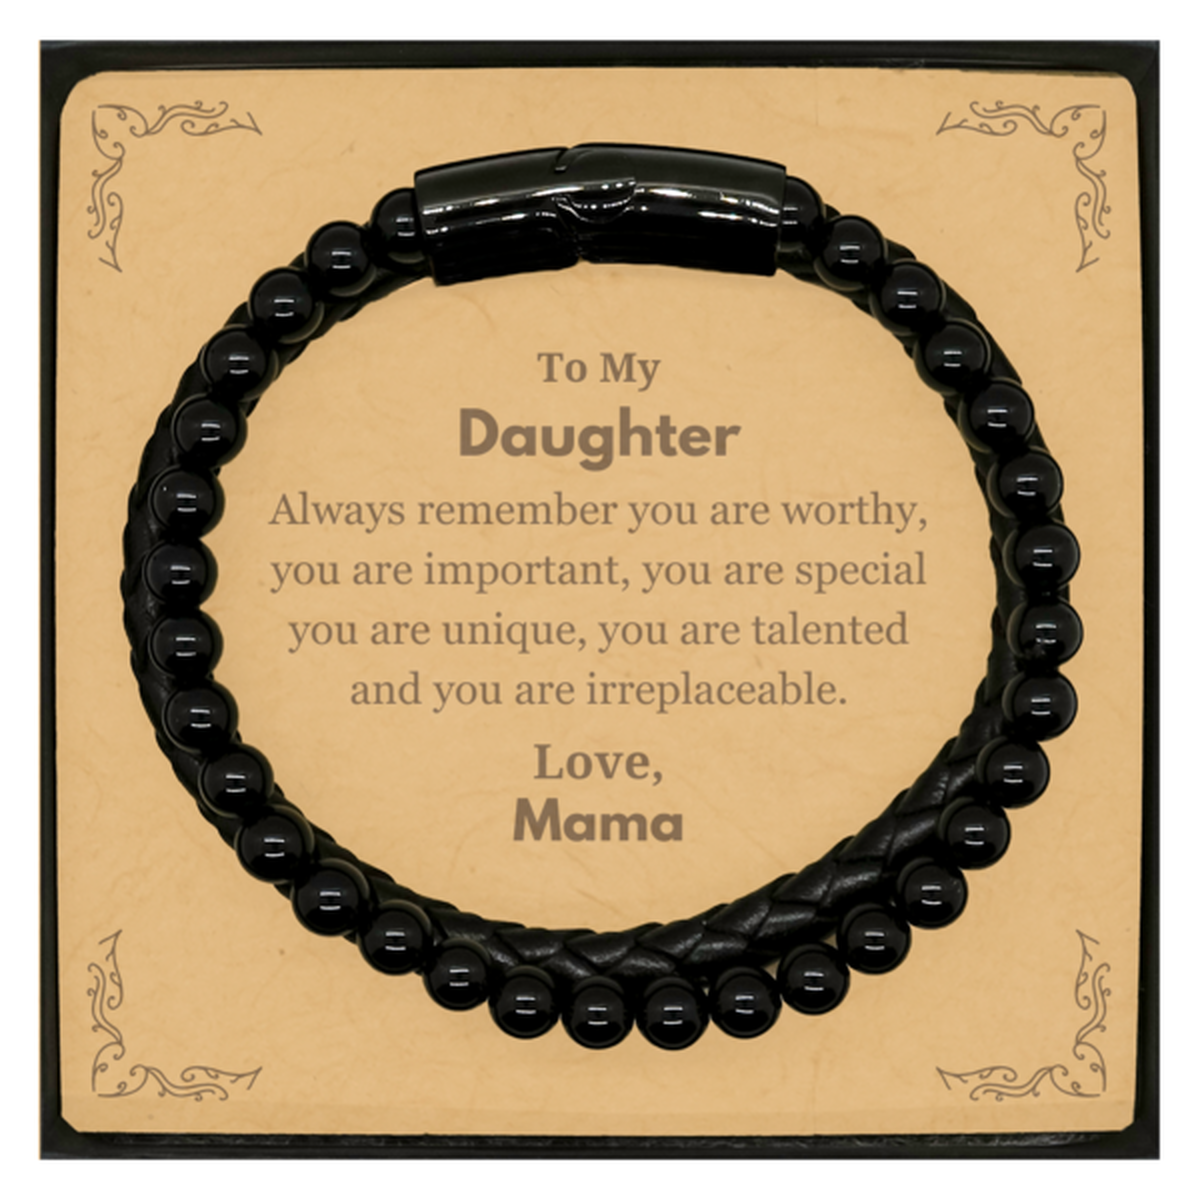 Daughter Birthday Gifts from Mama, Inspirational Stone Leather Bracelets for Daughter Christmas Graduation Gifts for Daughter Always remember you are worthy, you are important. Love, Mama